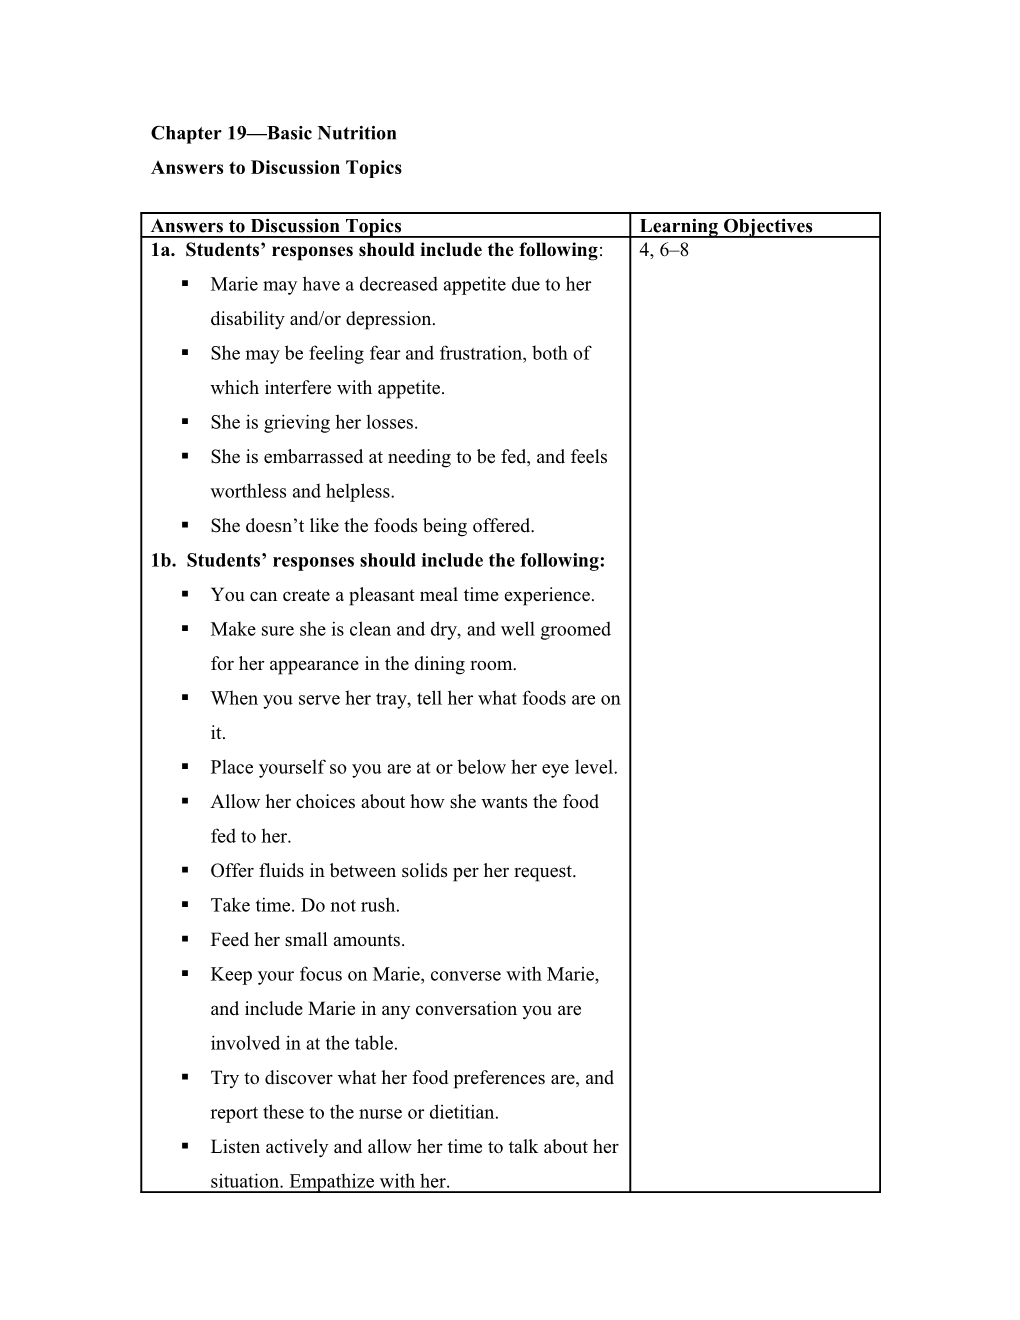 Suggested Answers for Discussion Topics, Chapter 19